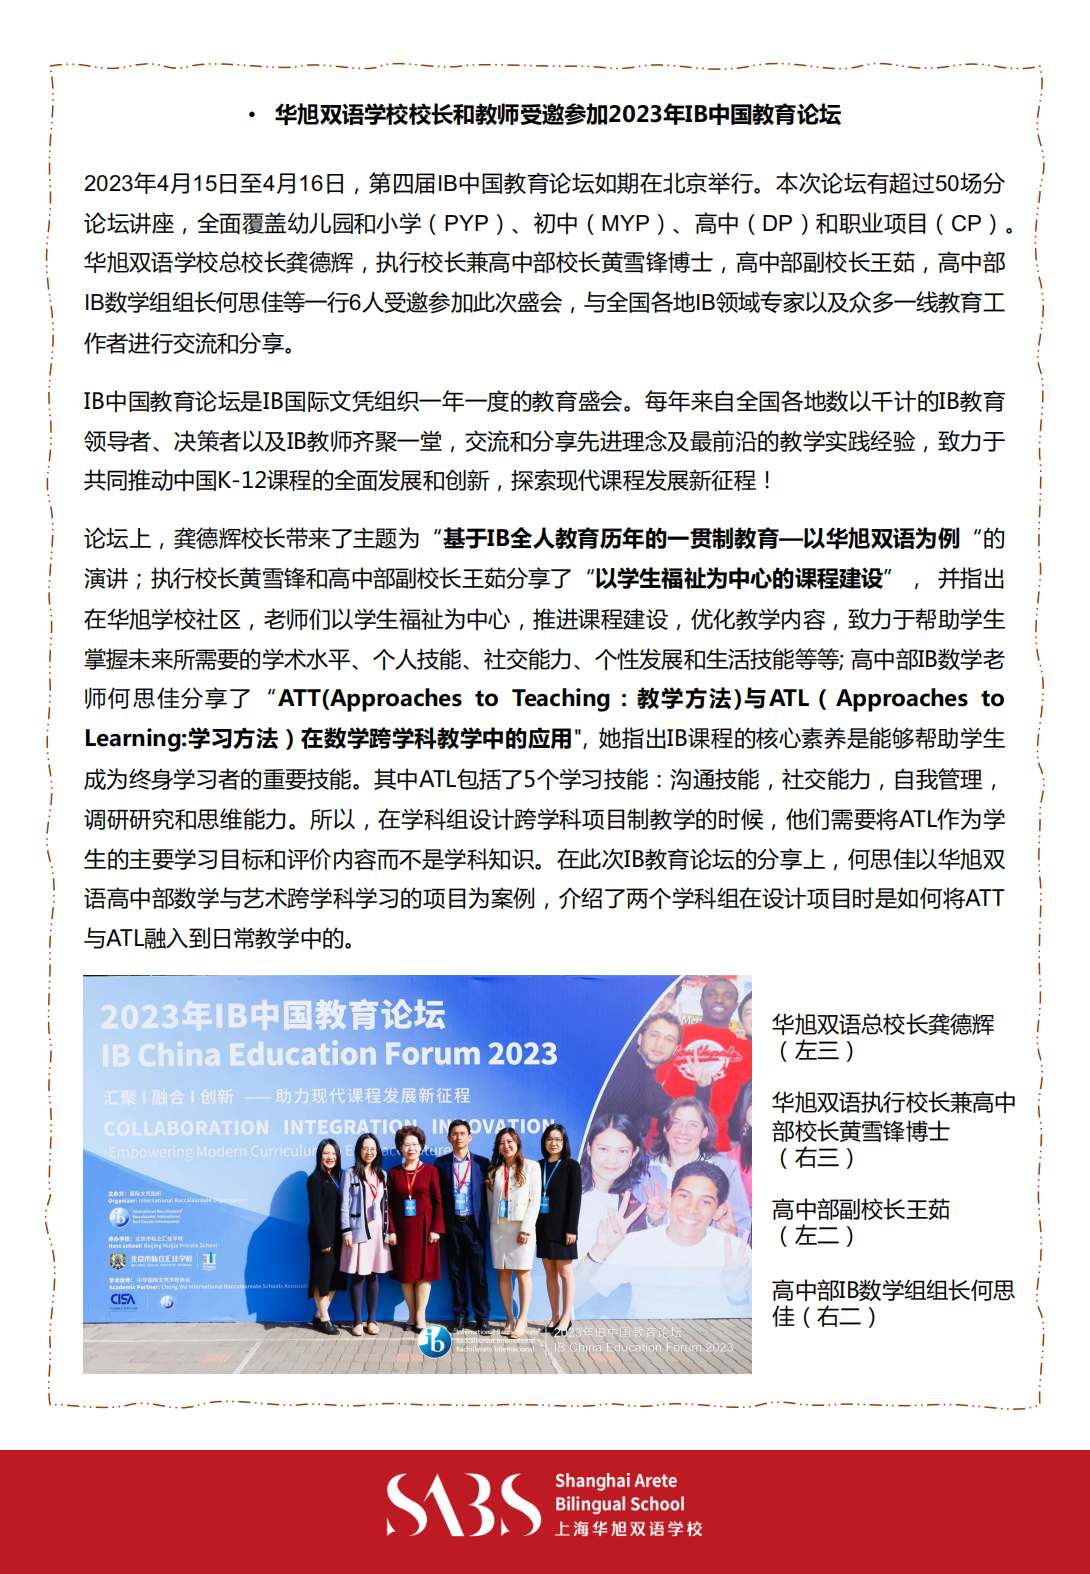 HS 5th Issue Newsletter pptx（Chinese)_04.png